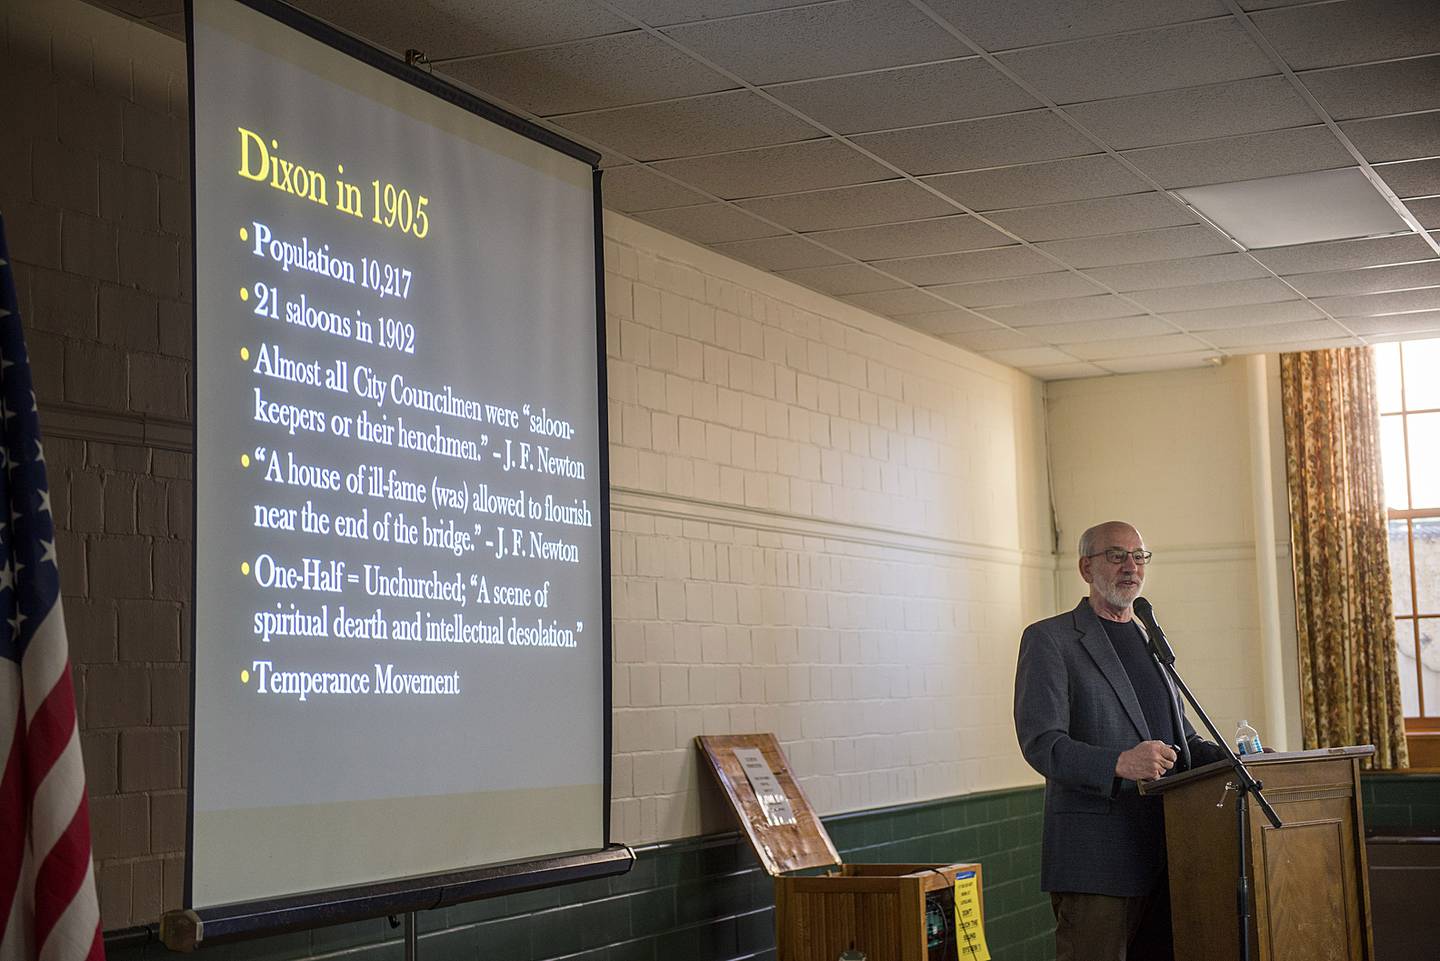 Tom Wadsworth gives a brief description of Dixon as it was in 1905 during a commemoration of Founders Day held Monday at Loveland Community Building. About 150 people attended the presentation, mainly focused on the winter revival held by Billy Sunday that year.  At the time of the revival Dixon was described as “ scene of spiritual dearth and intellectual desolation.” Saloons were prevalent and nearly all city council members were “saloon-keepers or their henchmen.”